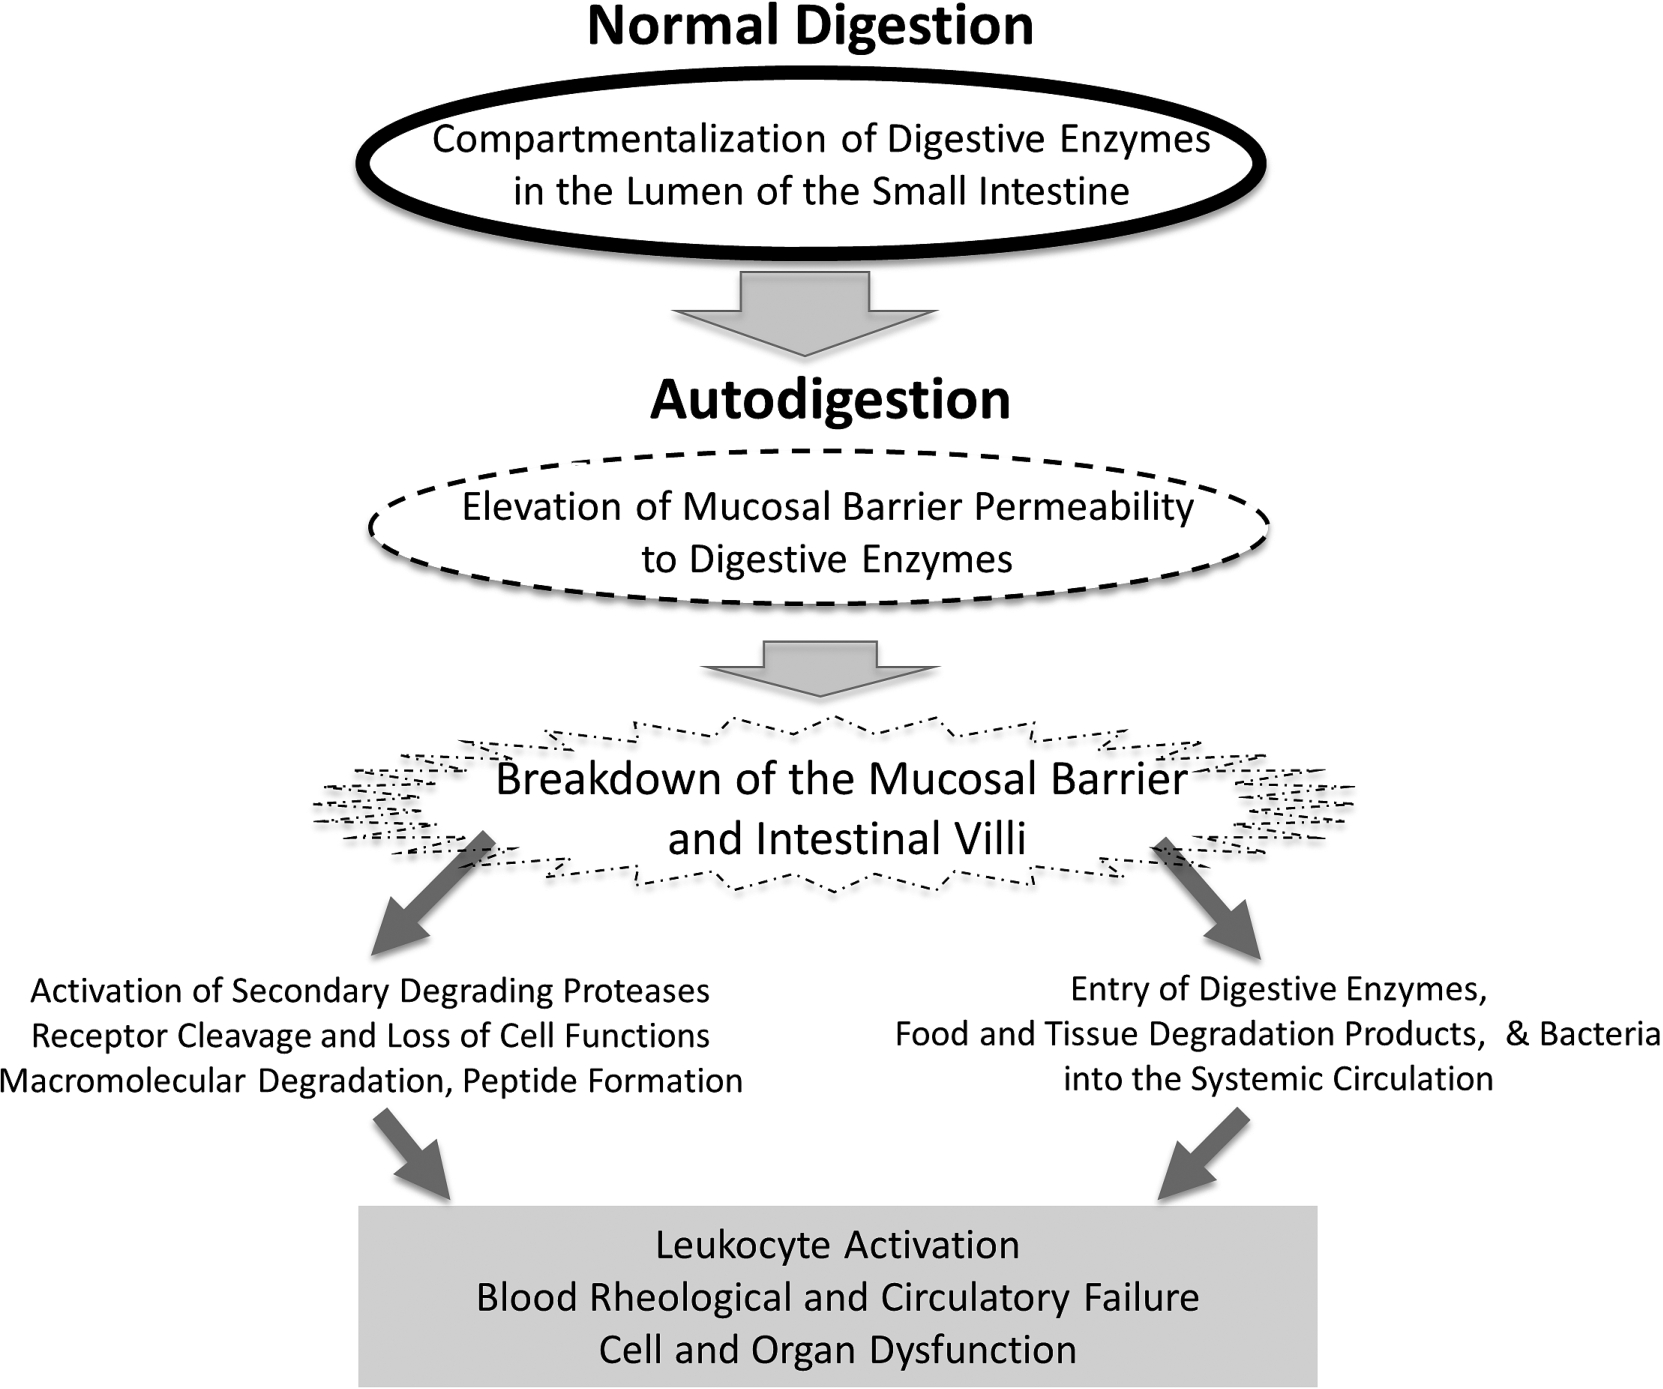 Schematic diagram of key events during the transition from normal digestion into autodigestion and its extensive consequences in the central circulation, including leukocyte activation, blood rheological changes to the point of full organ failure.